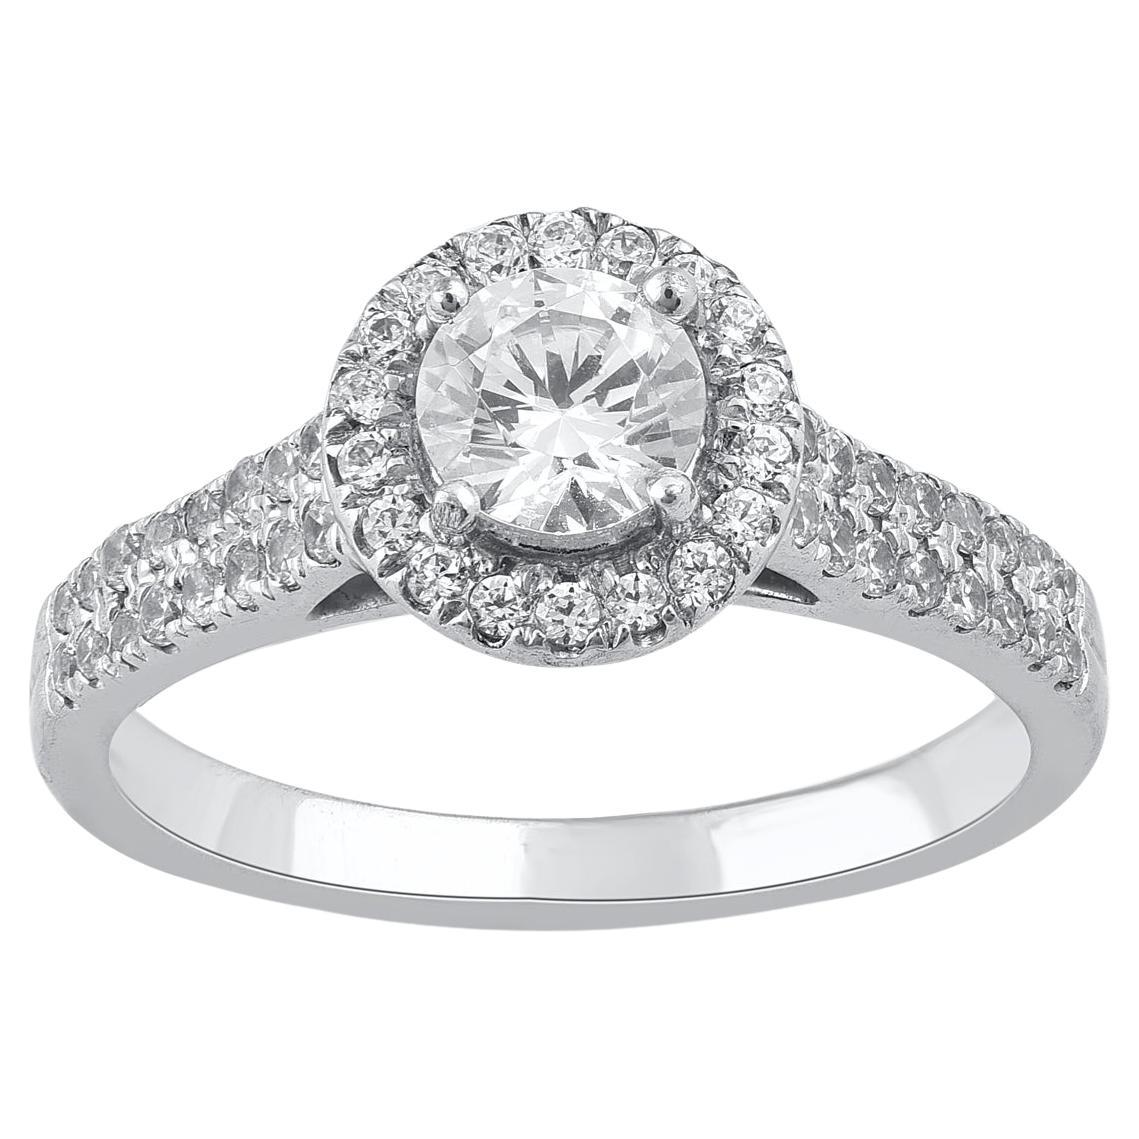 TJD 1.0 Carat Brilliant Cut Round Diamond 14KT White Gold Halo Engagement Ring For Sale